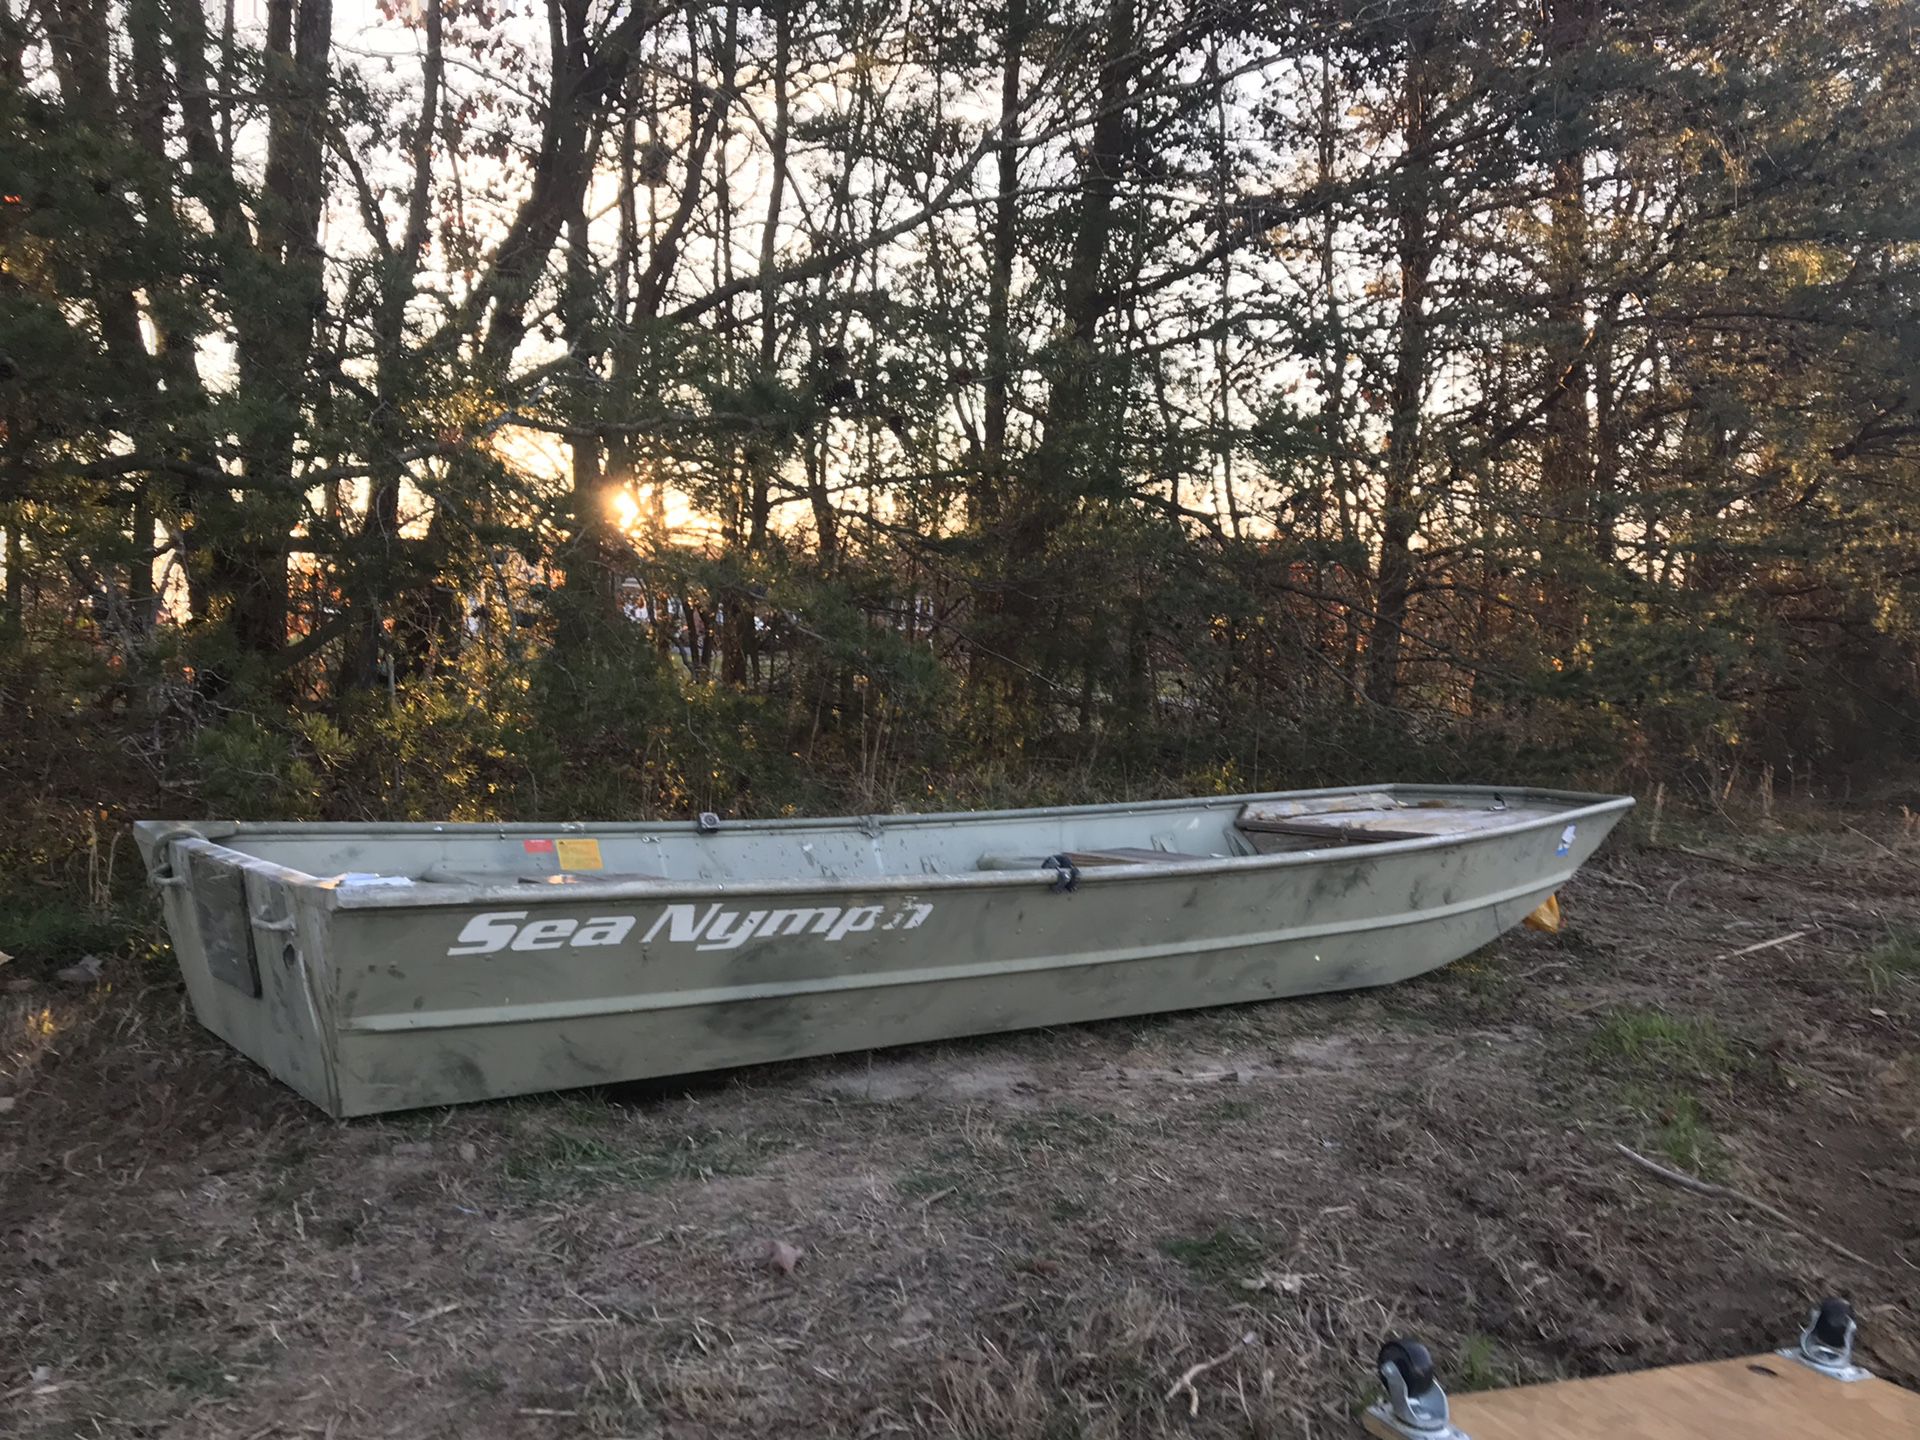 14’ sea nymph Jon boat with trolling motor, will consider trades on chainsaws, tools, landscape equipment, etc. great Jon boat. I have no use for it